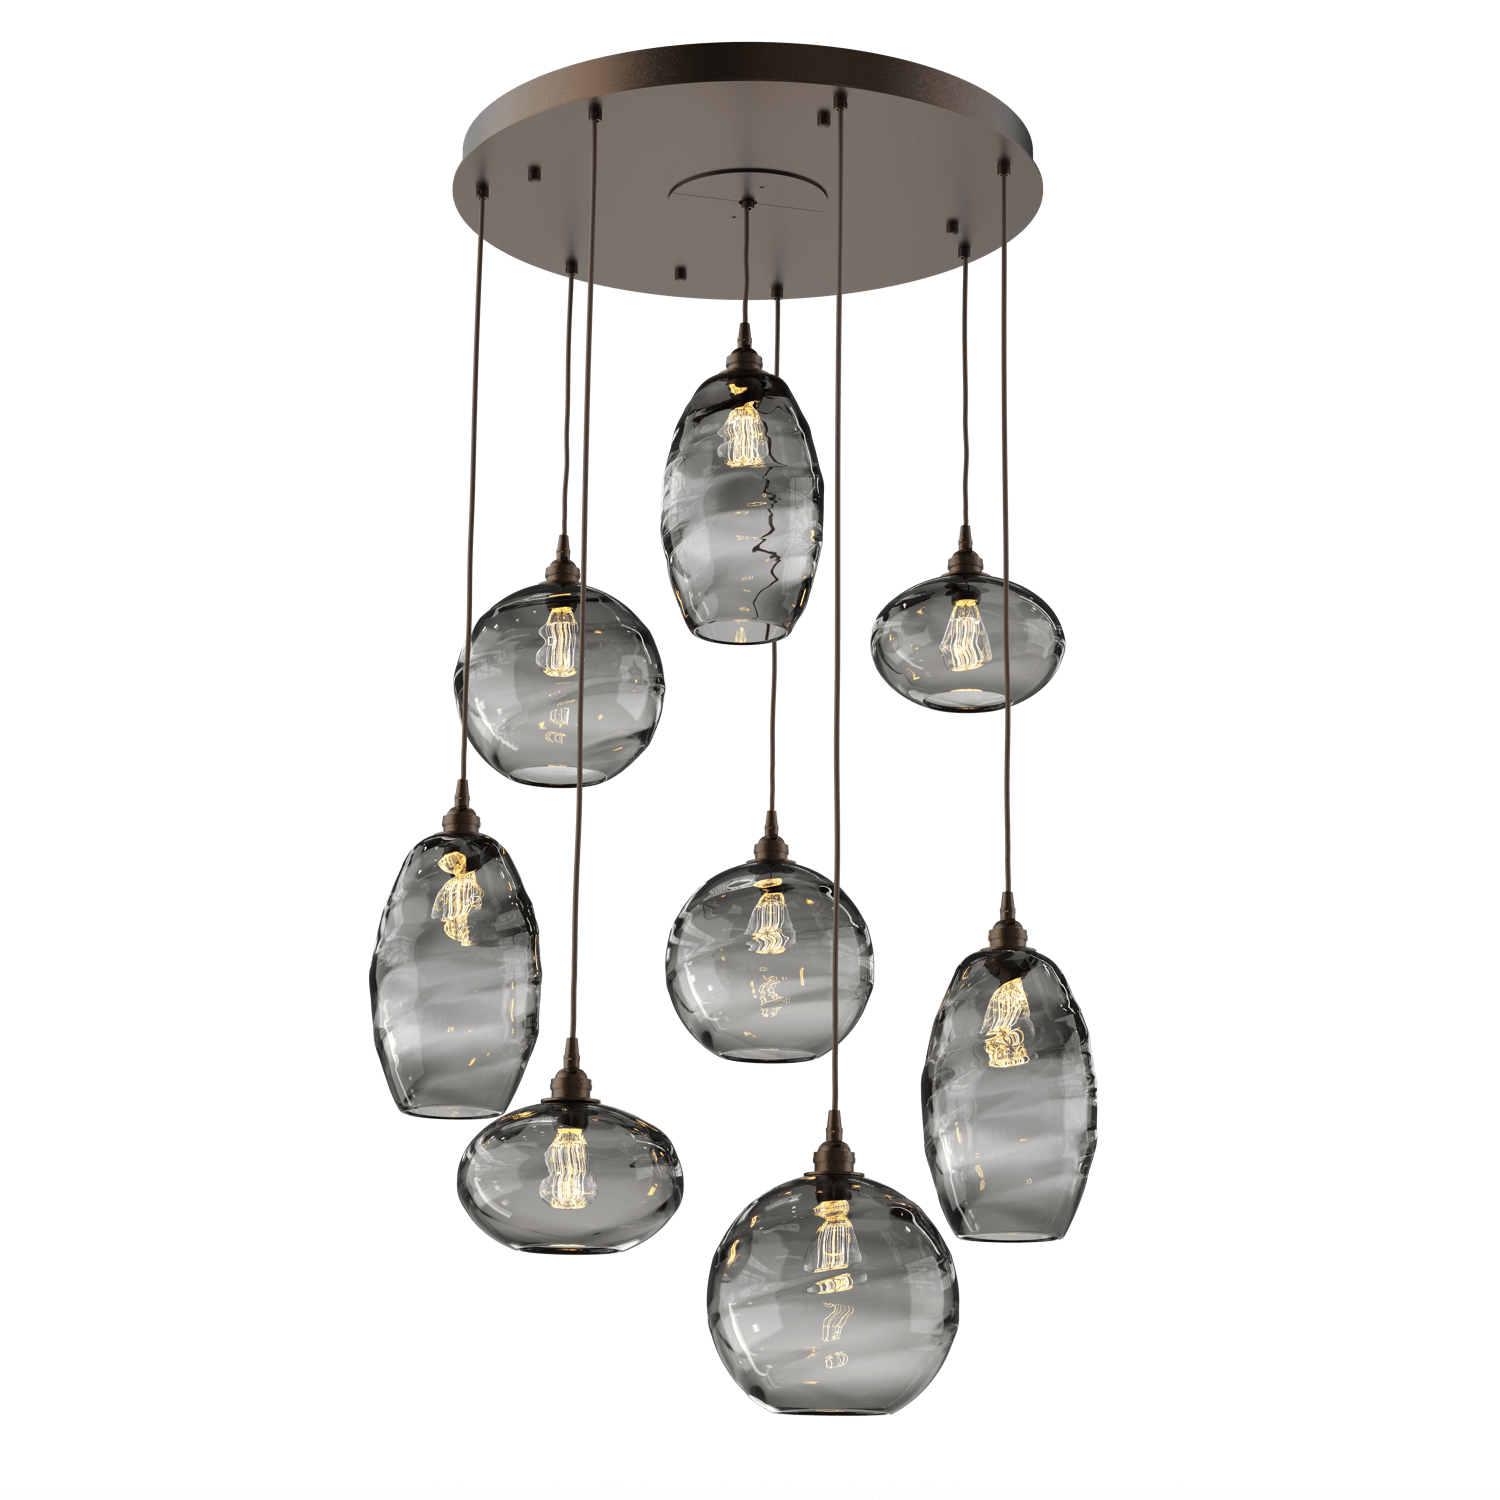 CHB0048-08-FB-OS-Hammerton-Studio-Optic-Blown-Glass-Misto-8-light-round-pendant-chandelier-with-flat-bronze-finish-and-optic-smoke-blown-glass-shades-and-incandescent-lamping